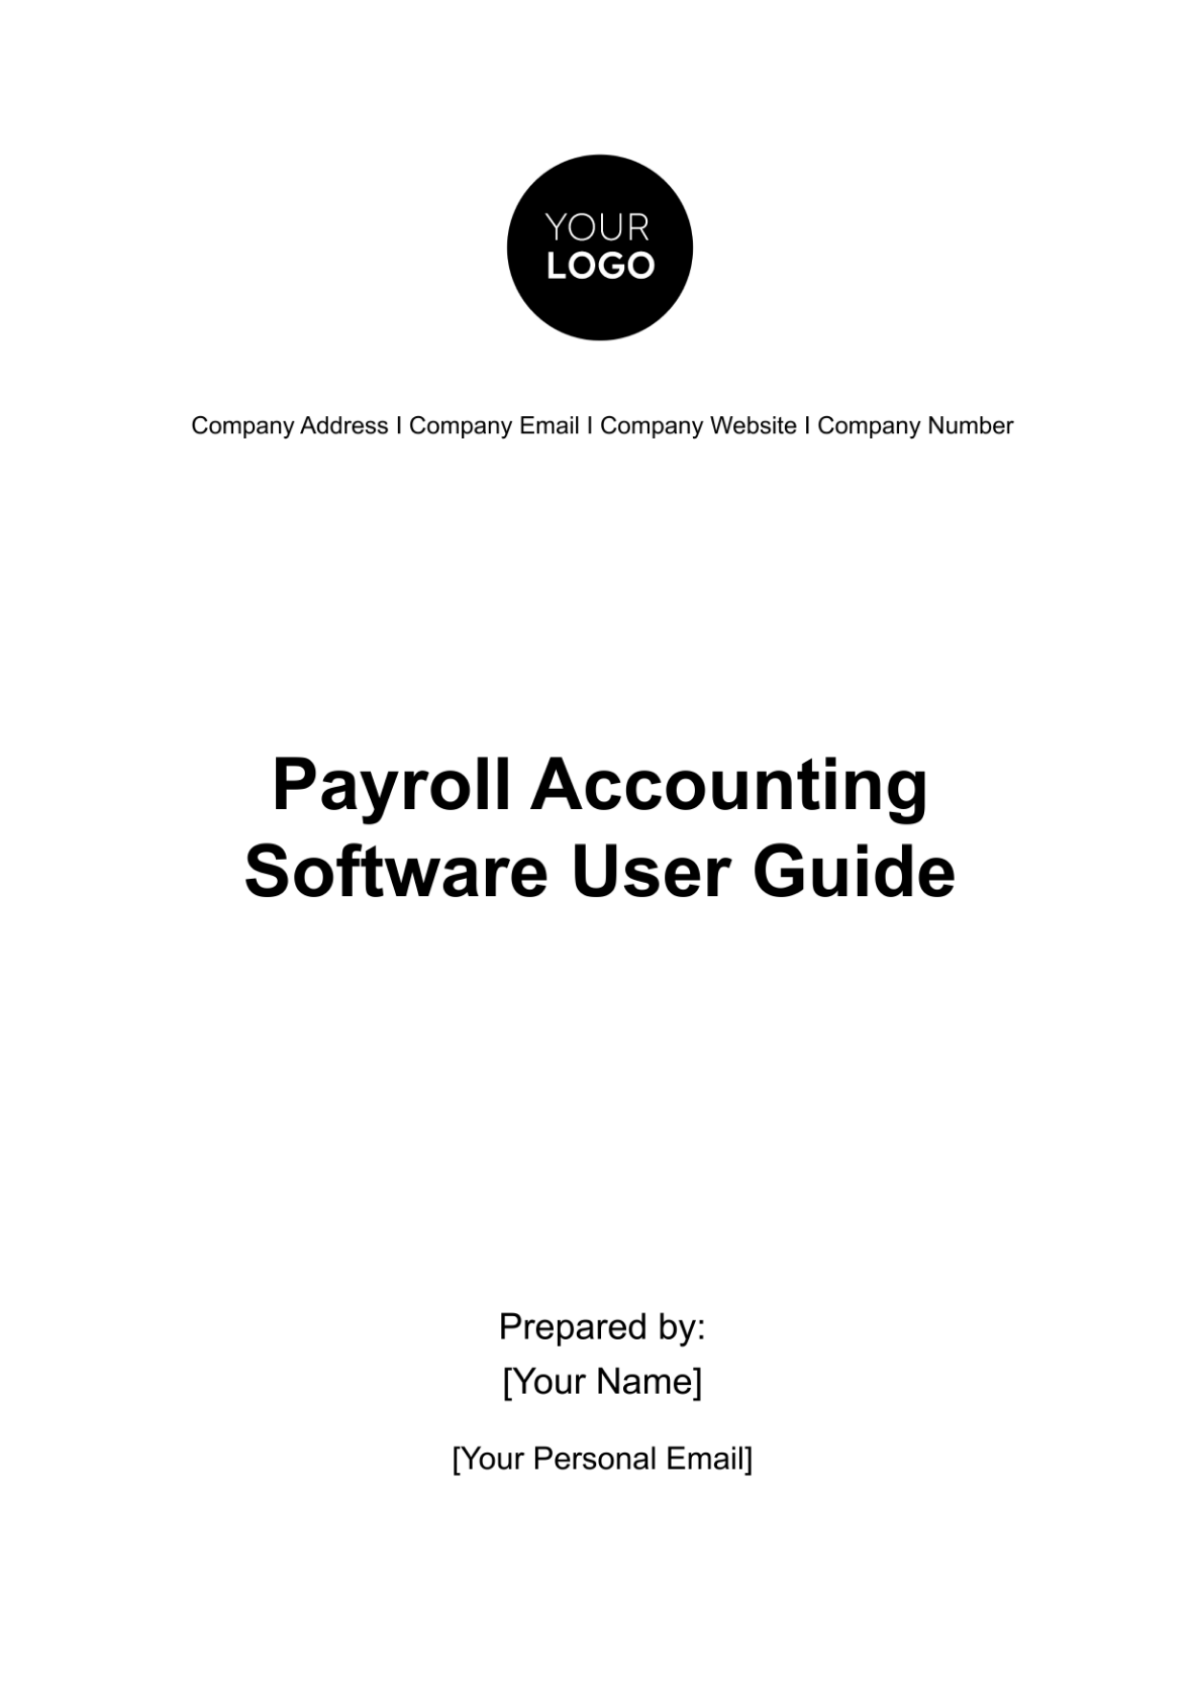 Payroll Accounting Software User Guide Template